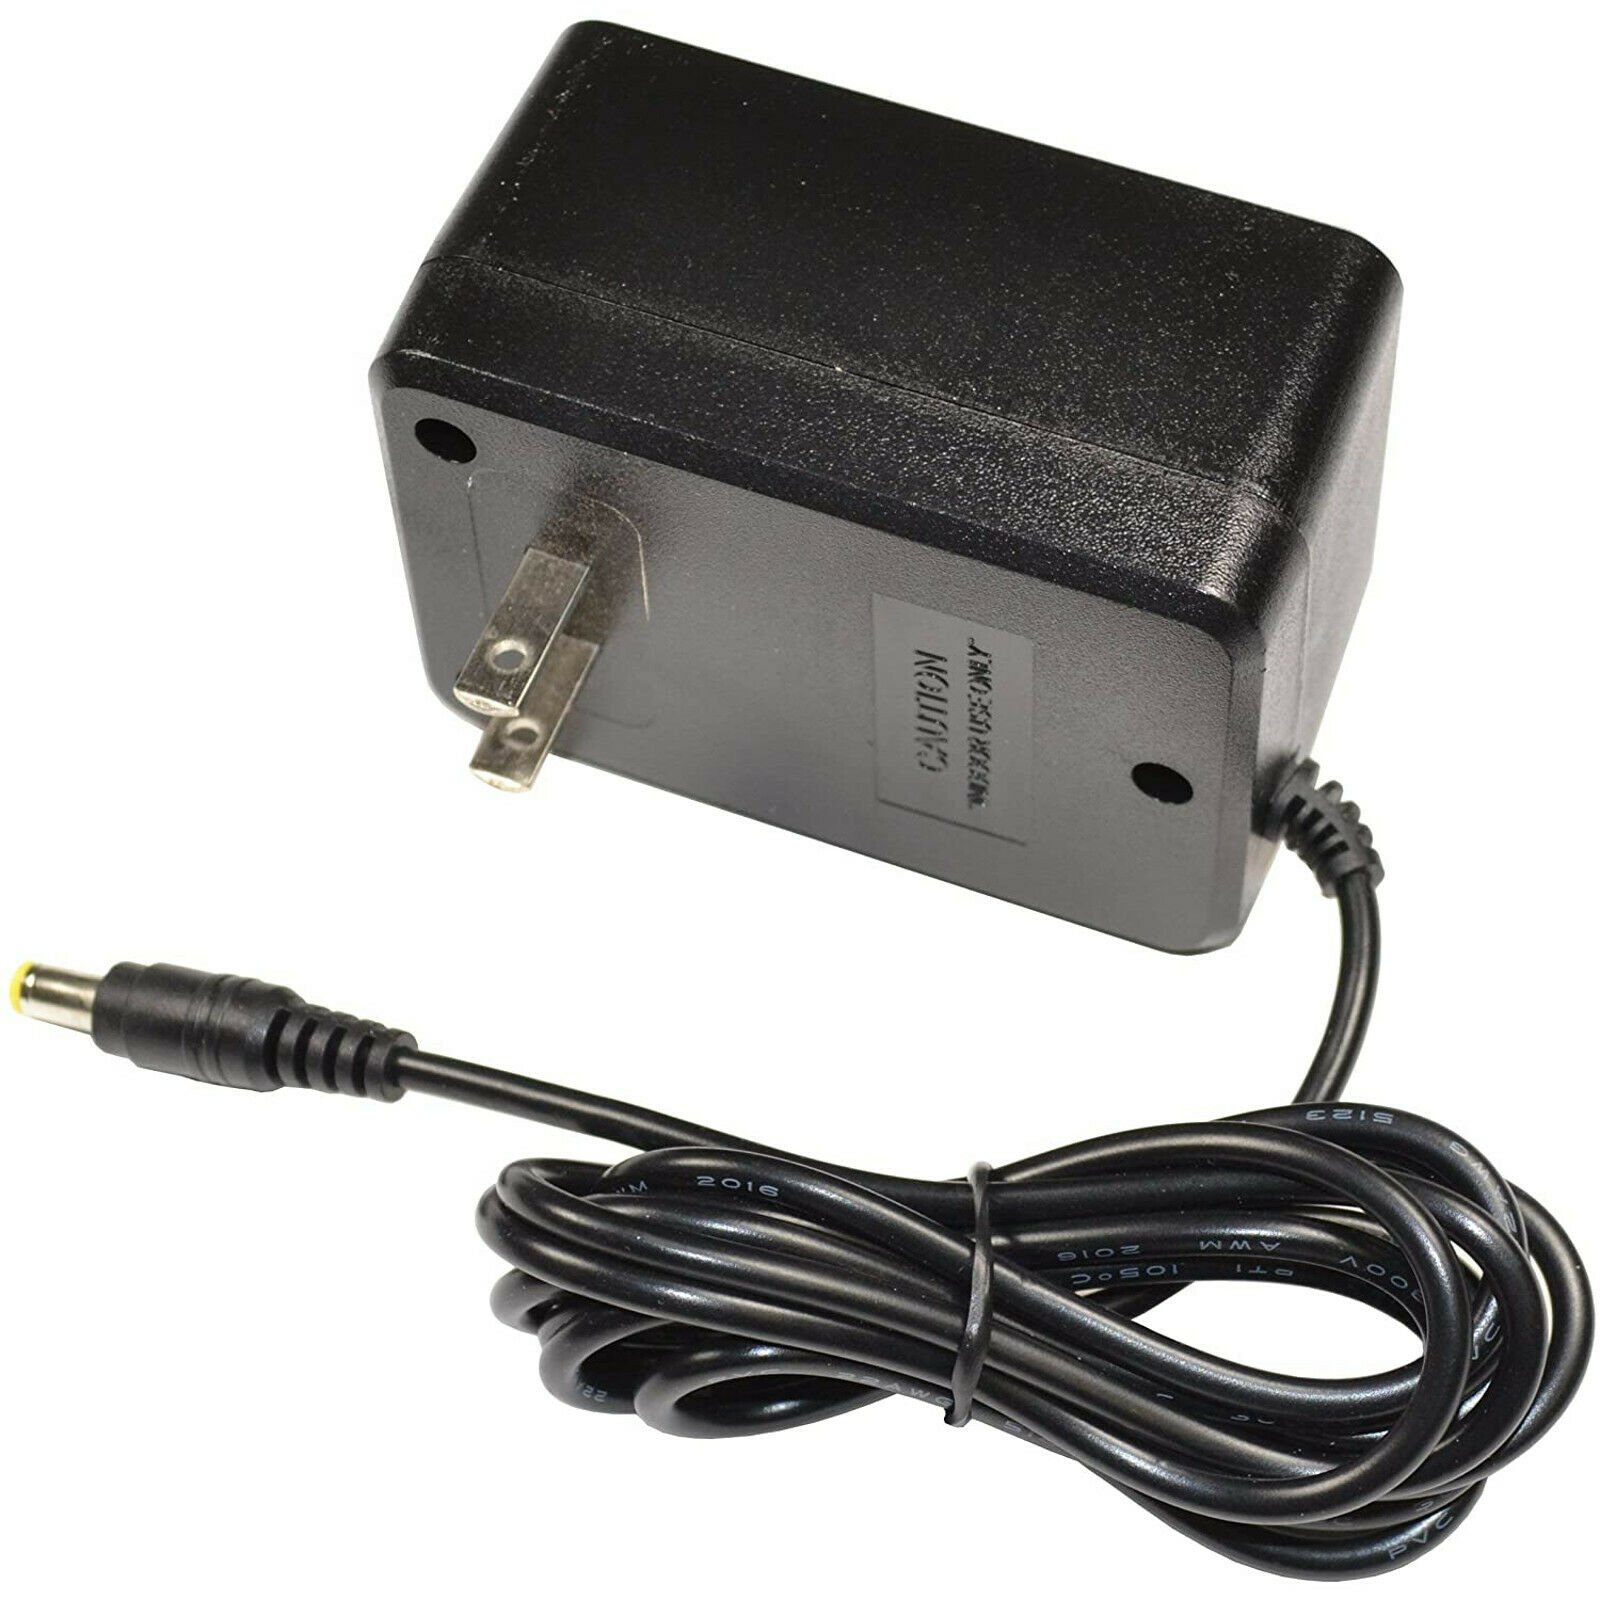 AC Adapter For Boss Roland SE-50 Stereo Effects Processor Power Supply Charger 1 AC input voltage ……120VAC 2 Input freq - Click Image to Close